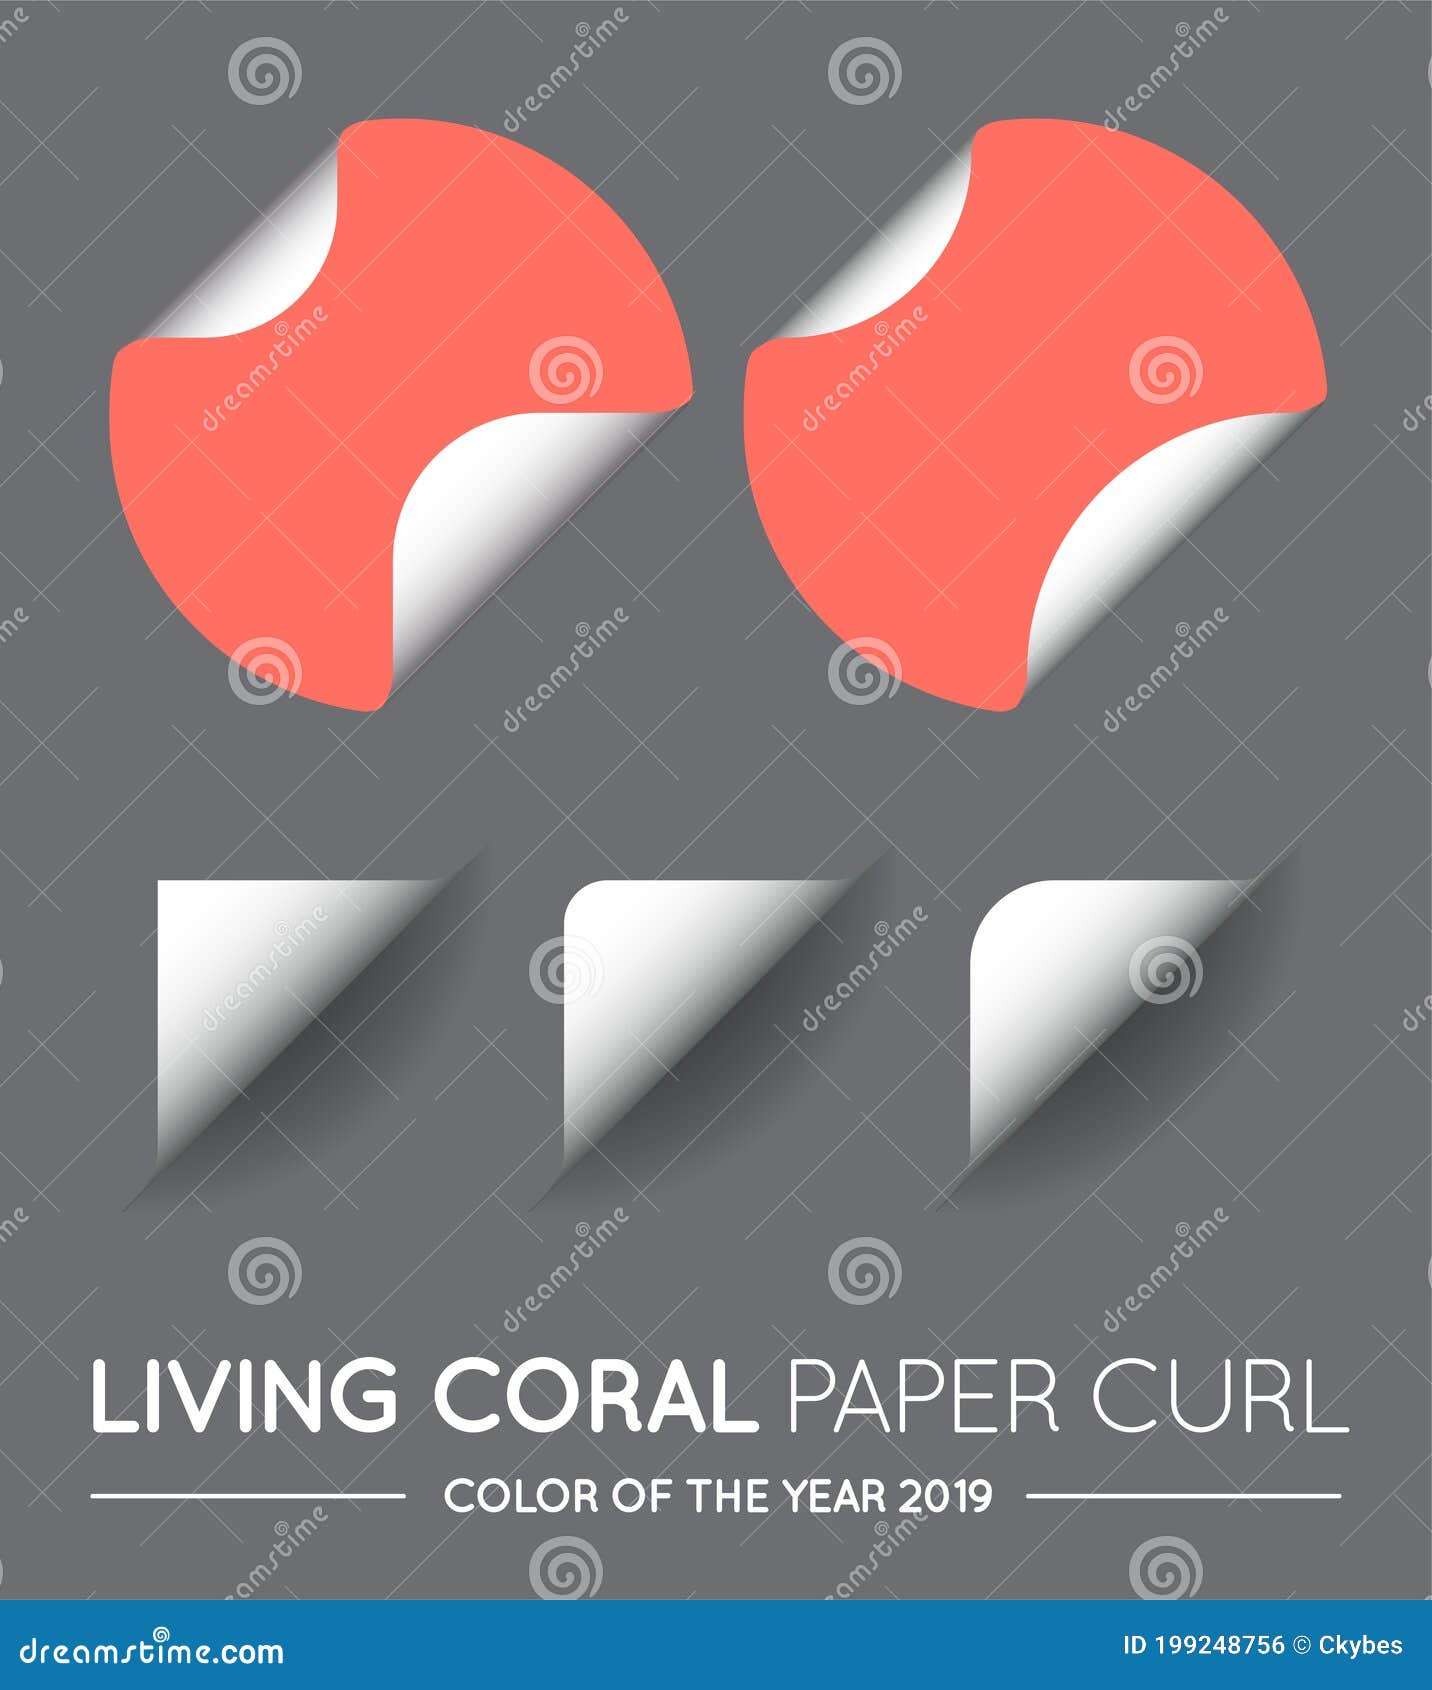 trendy color coral  round circle with paper curl with shadow  set